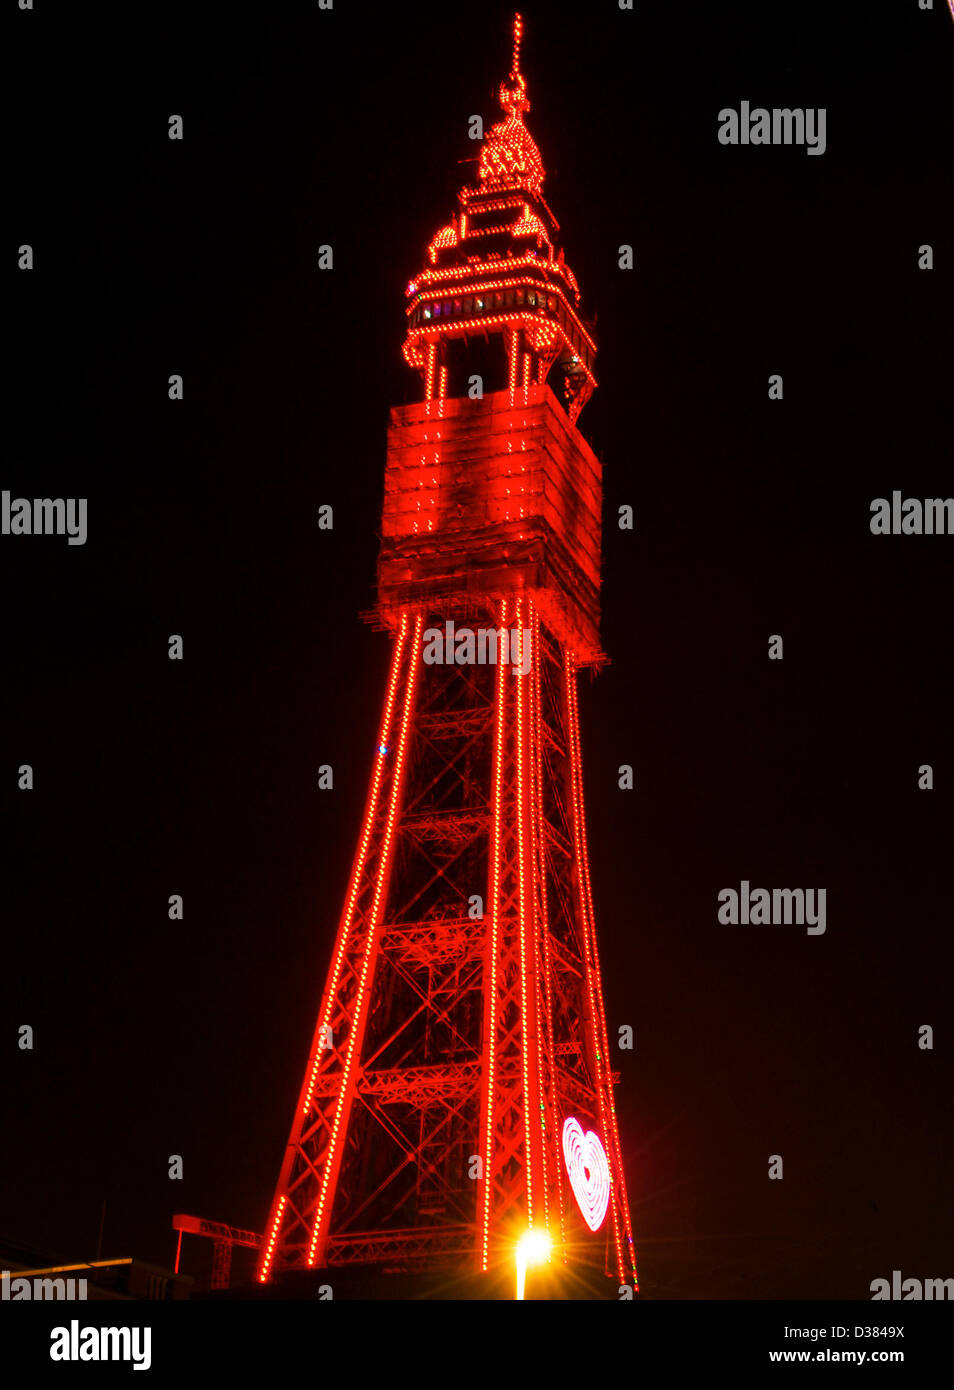 Blackpool,UK 12th Febuary 2013   The all new LED lighting on Blackpool tower is switched on for the first time after the legs have been in darkness for several years after major maintenance and refurbishment work was carried out.The iconic structure will shine bright red for the next few days to celebrate Valentine's day,Credit: kevin walsh / Alamy Live News Stock Photo